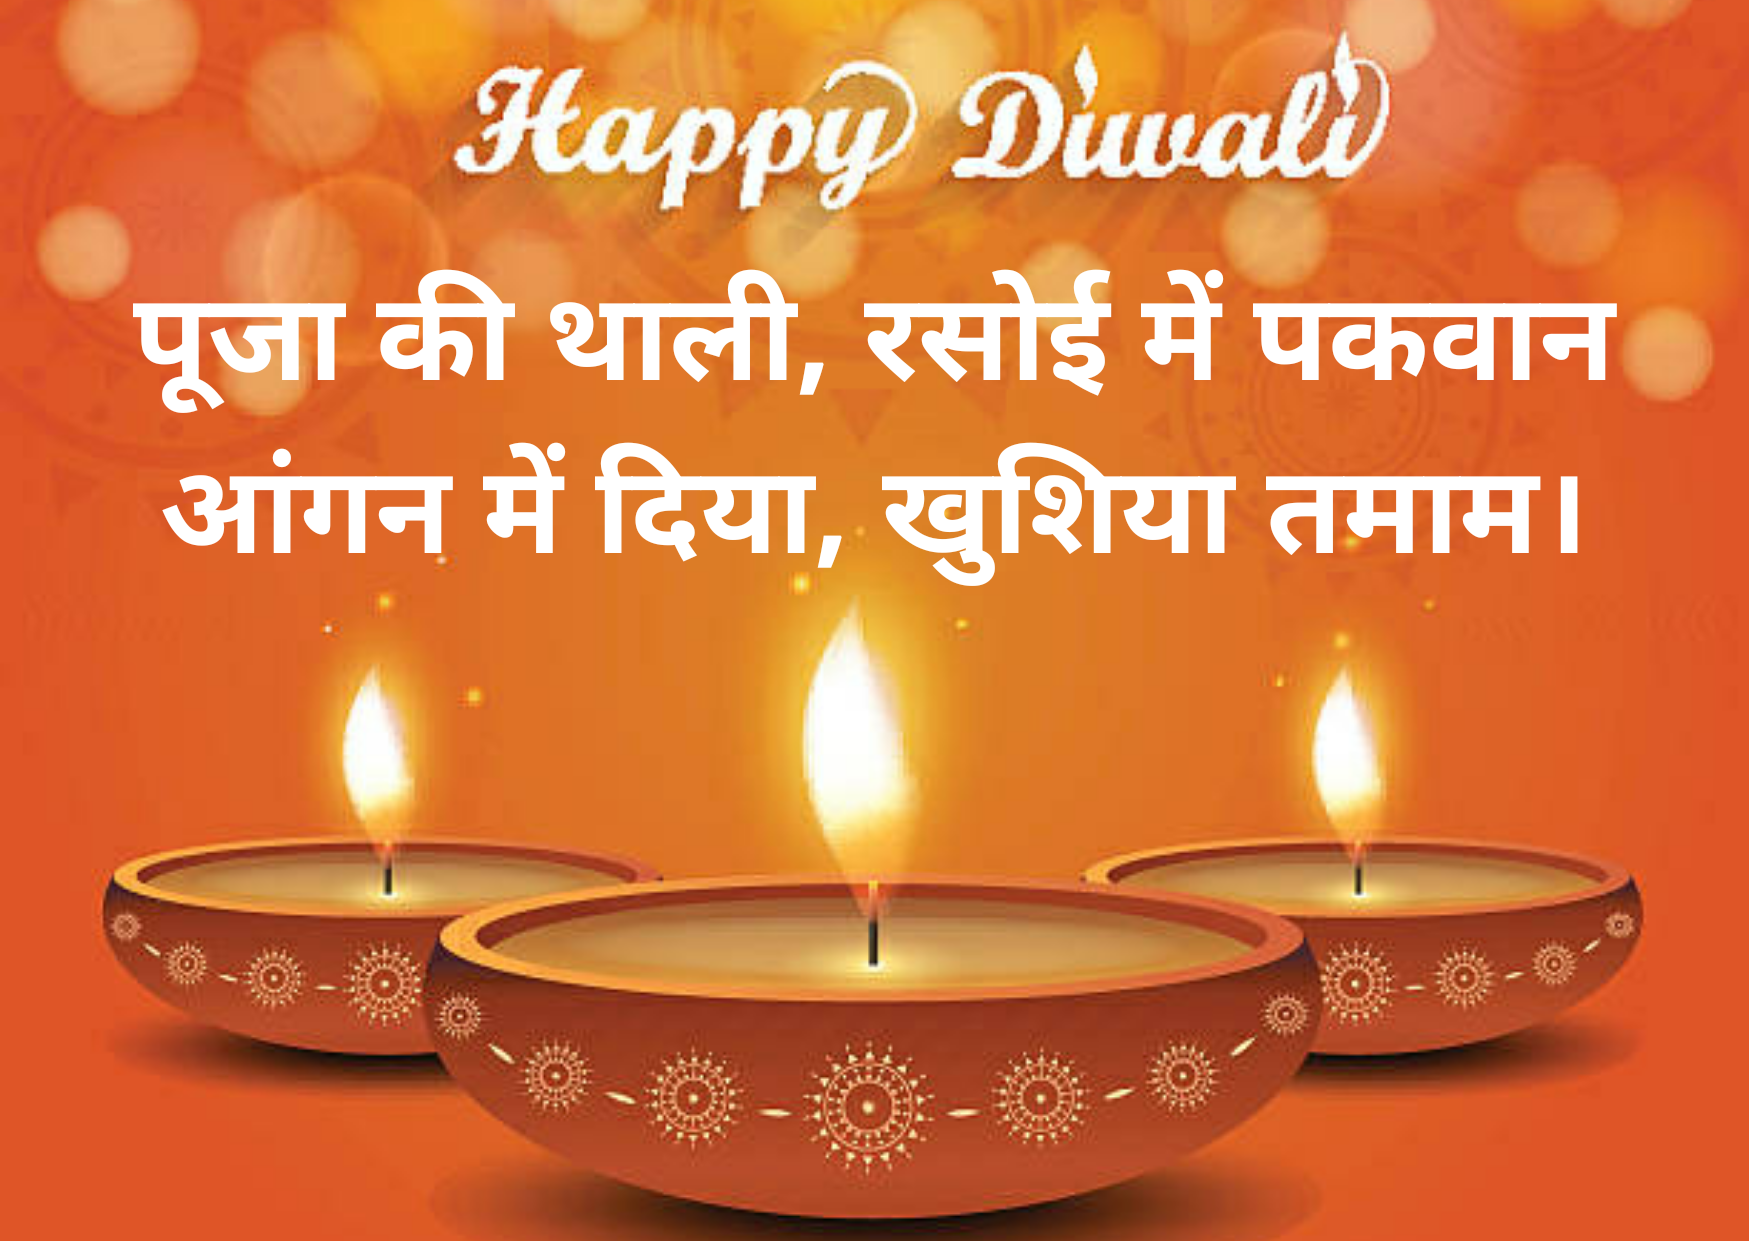 Happy Diwali Wishes, Images, quotes, status, greeting, for whatsapp free download,